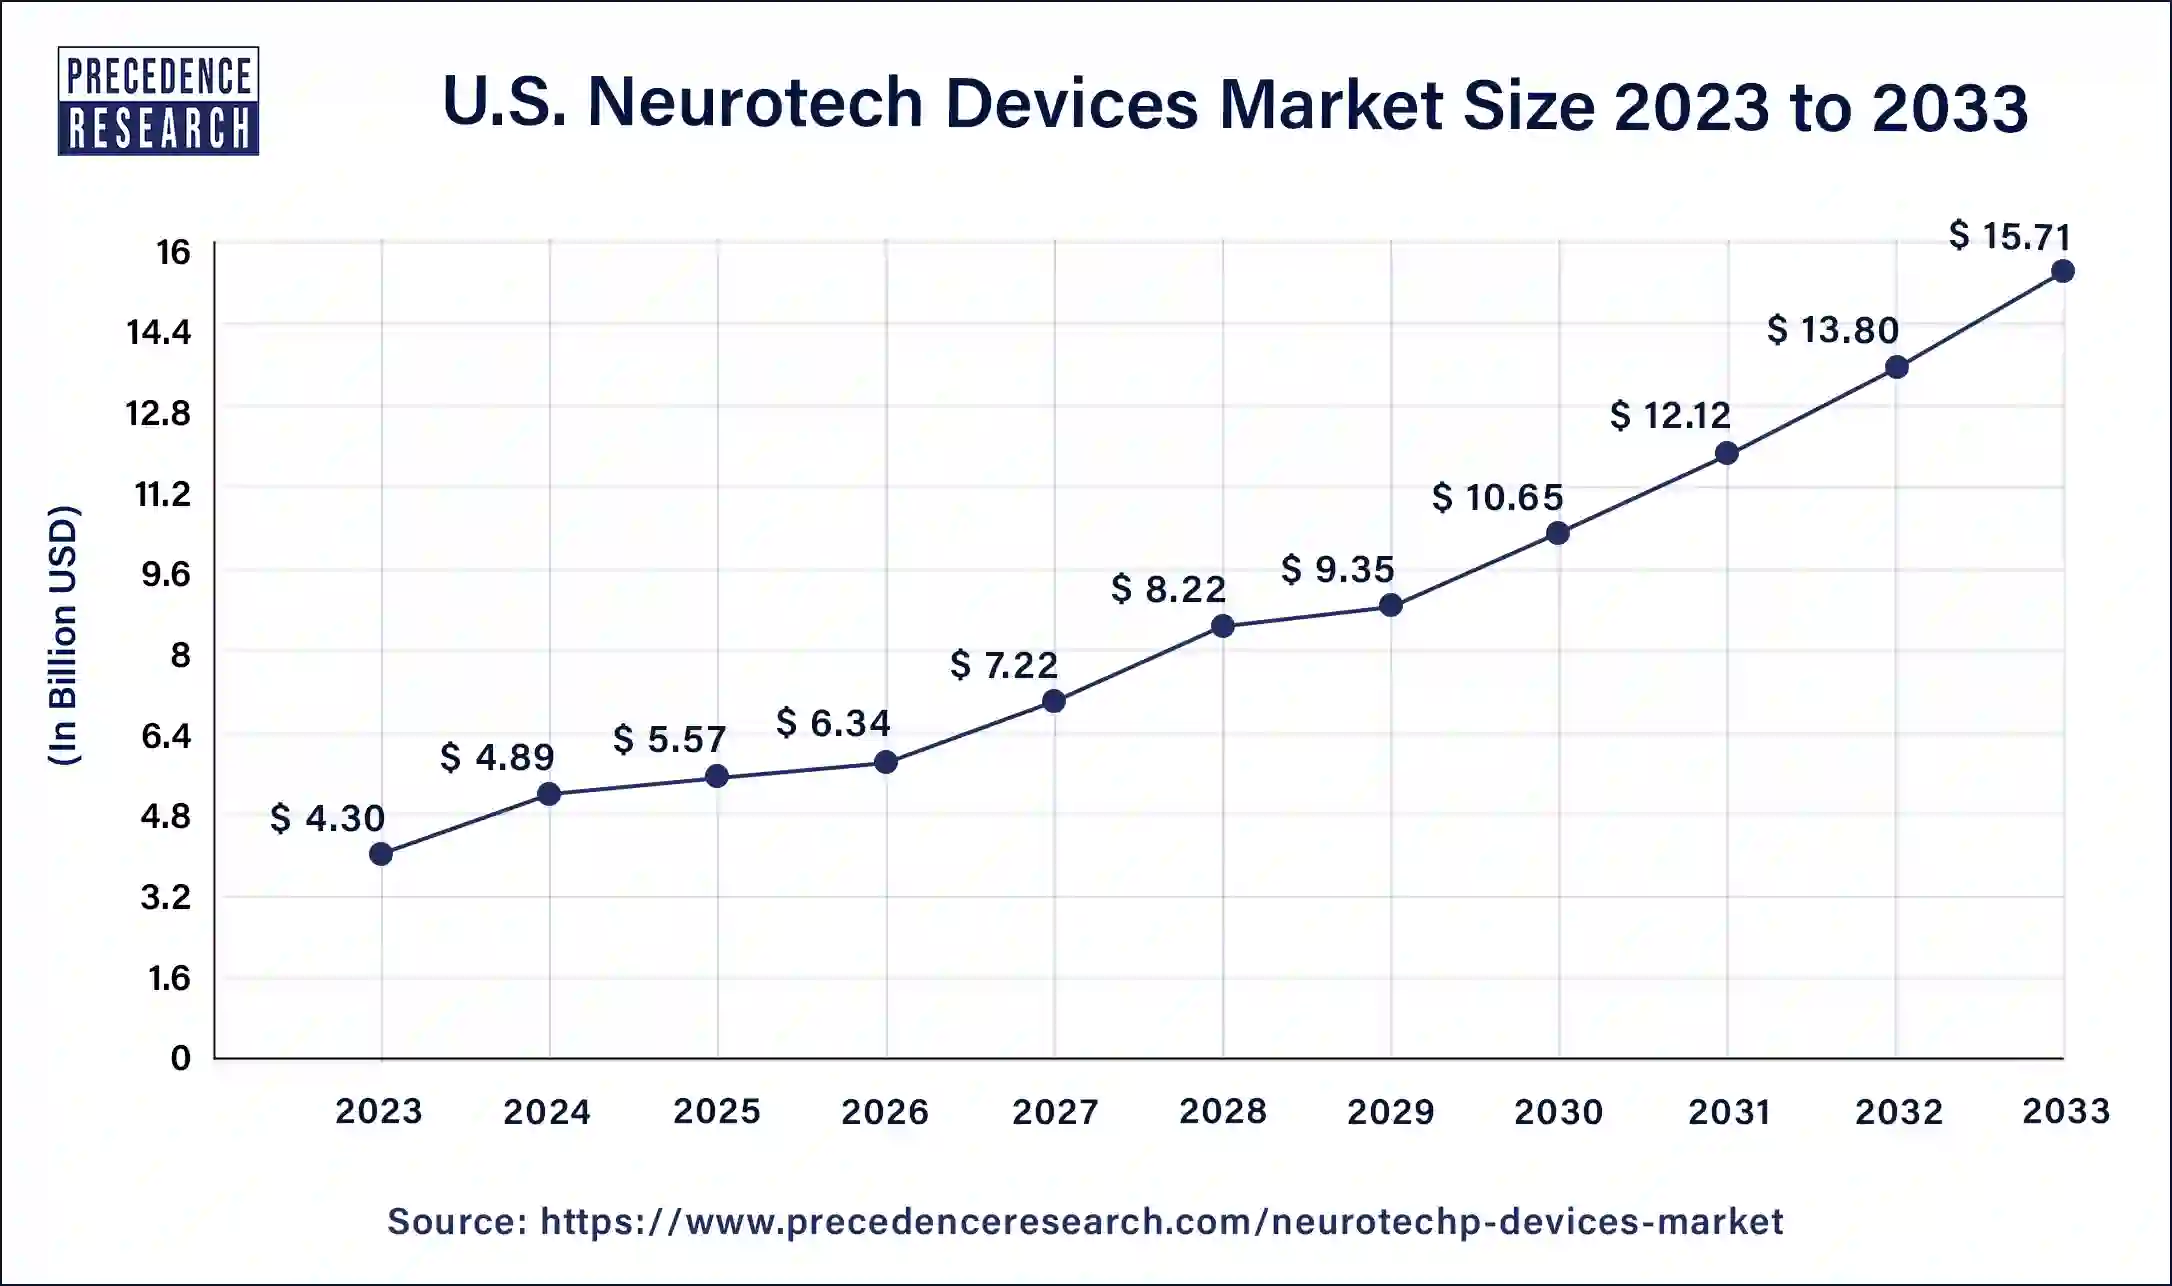 U.S. Neurotech Devices Market Size 2024 to 2033